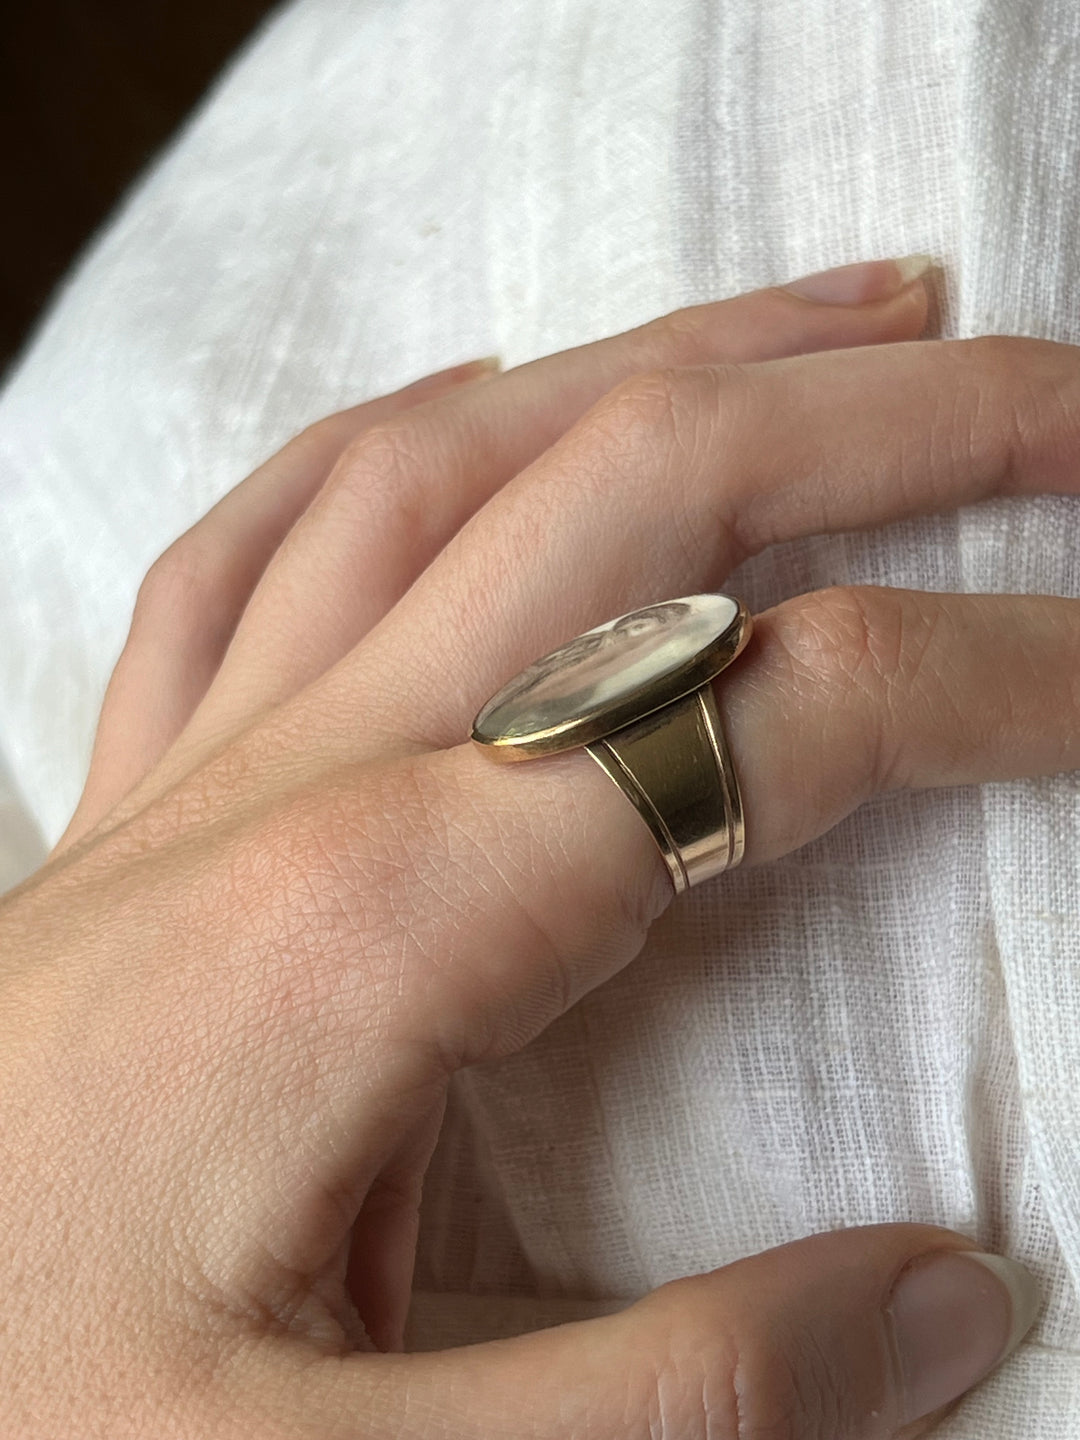 Georgian Sepia Ring Featuring the Allegory of Hope